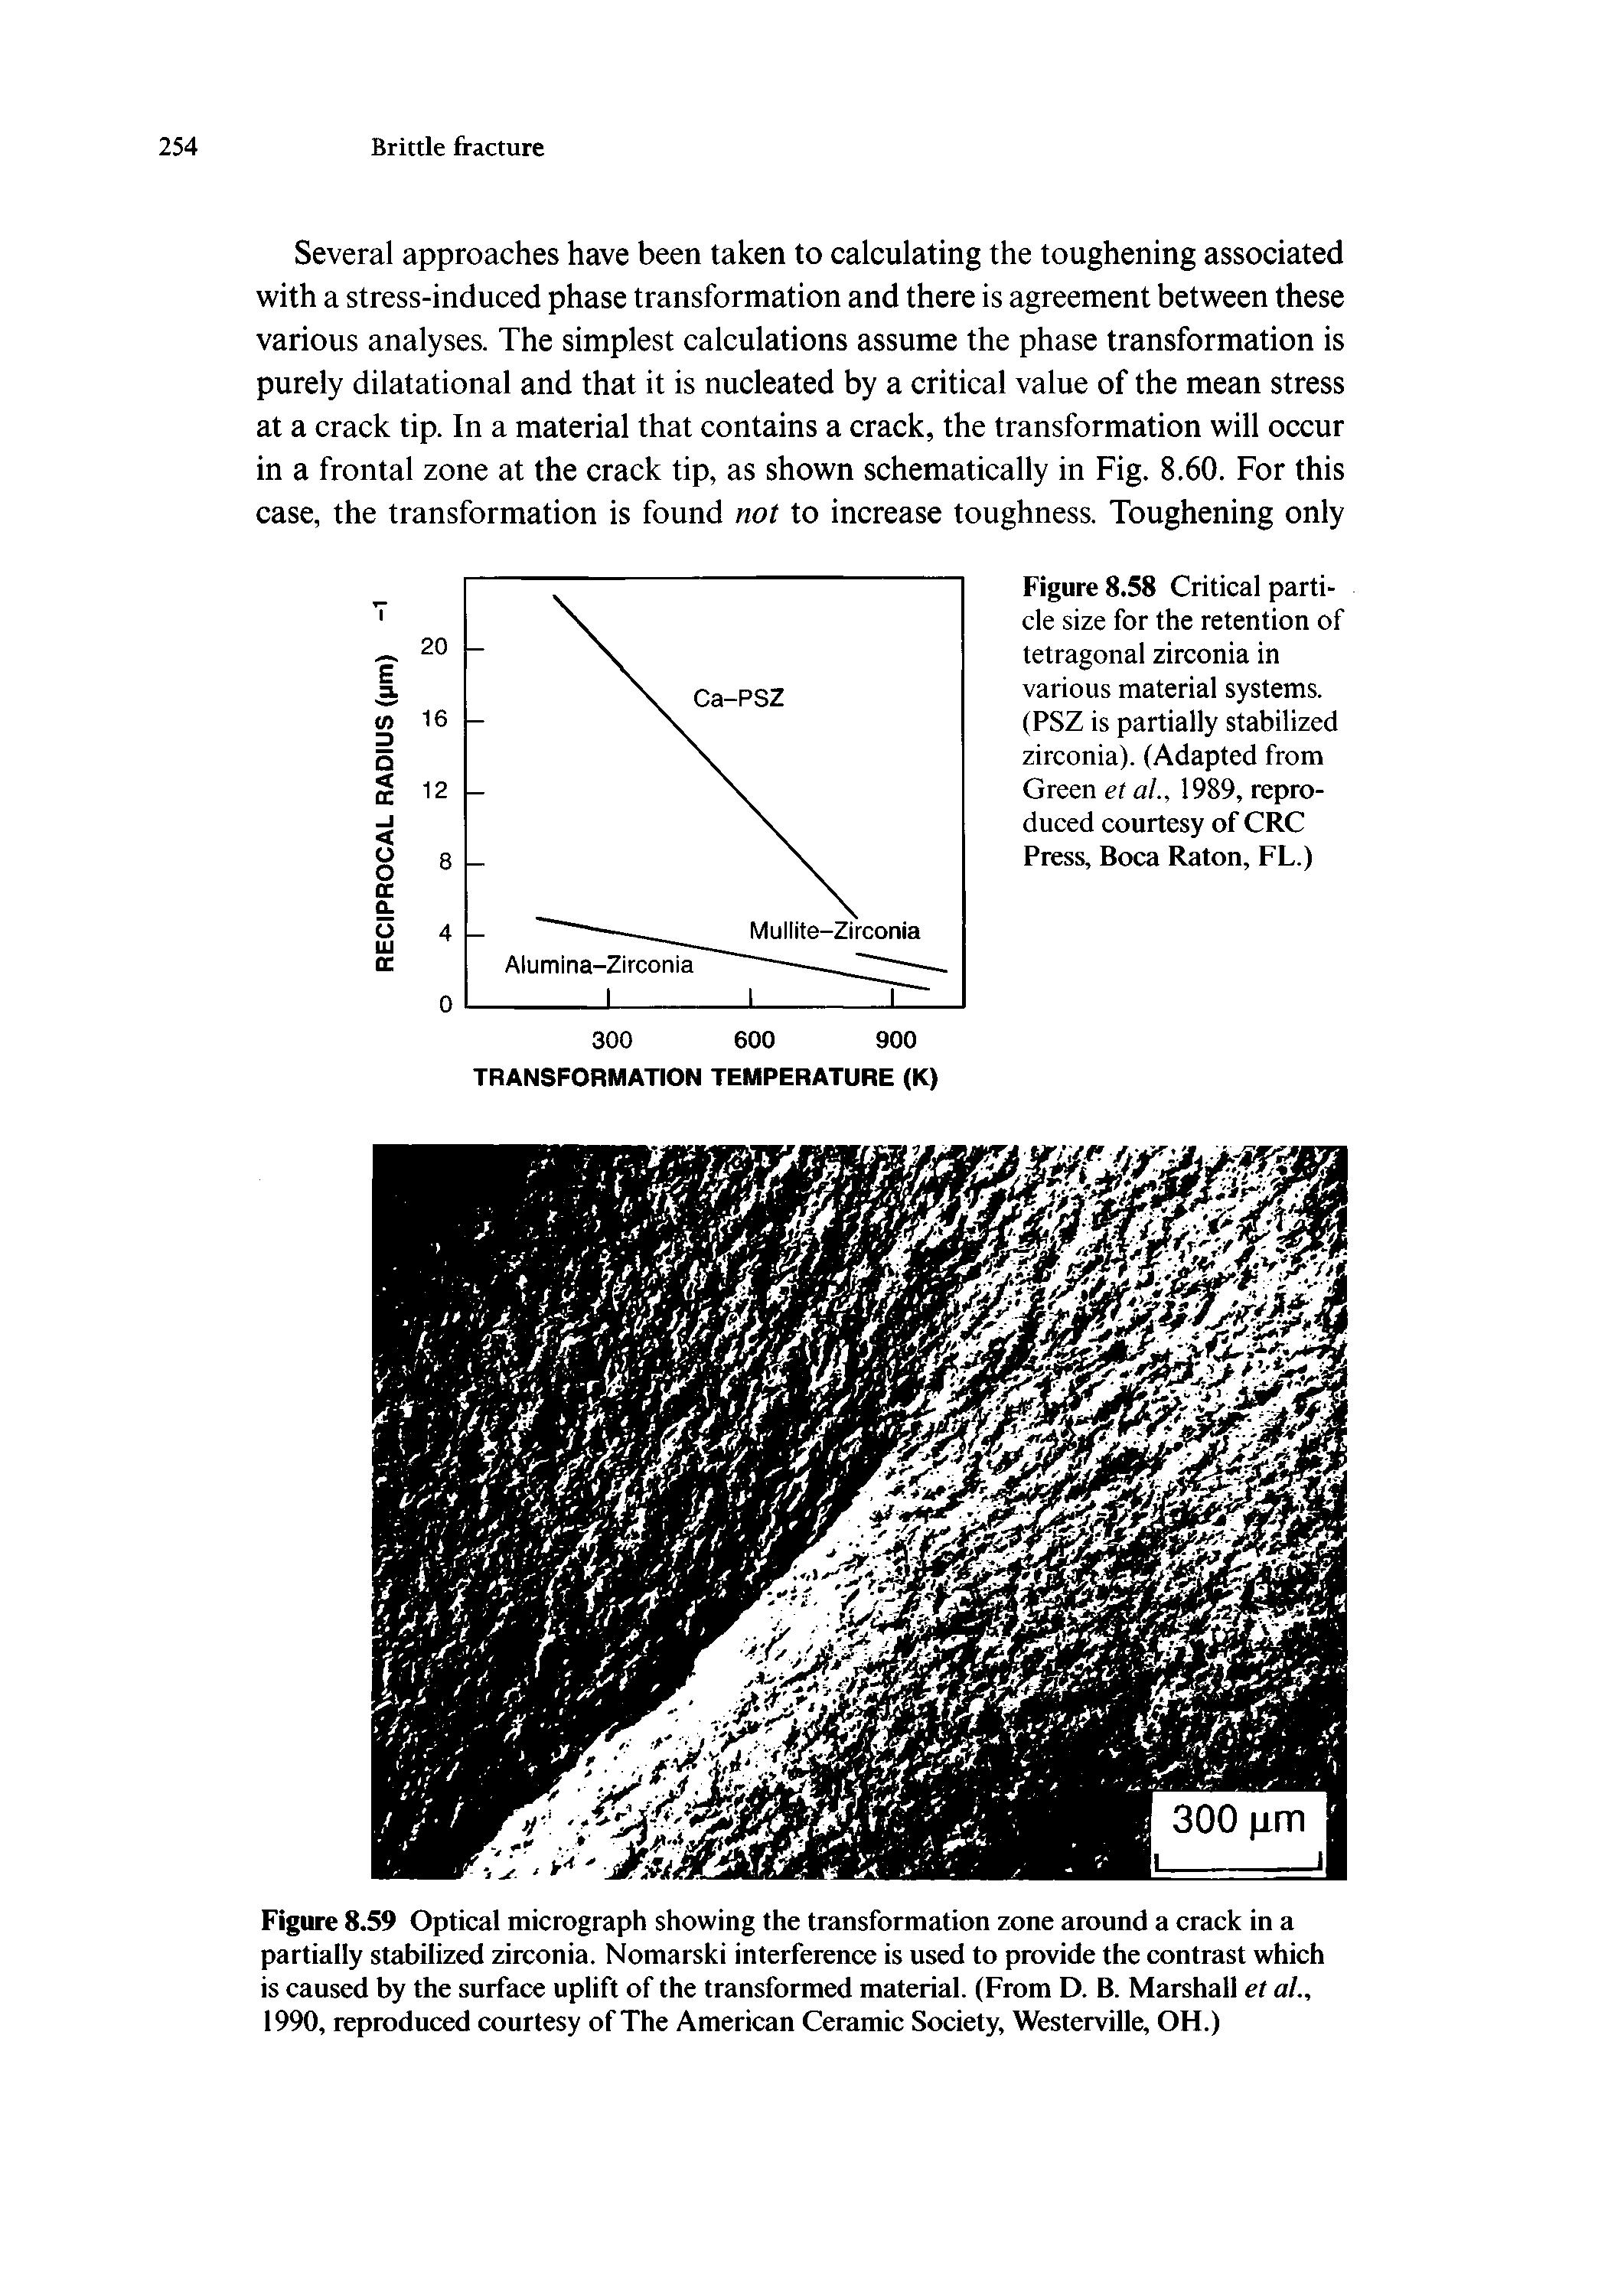 Figure 8.59 Optical micrograph showing the transformation zone around a crack in a partially stabilized zirconia. Nomarski interference is used to provide the contrast which is caused by the surface uplift of the transformed material. (From D. B. Marshall et al., 1990, reproduced courtesy of The American Ceramic Society, Westerville, OH.)...